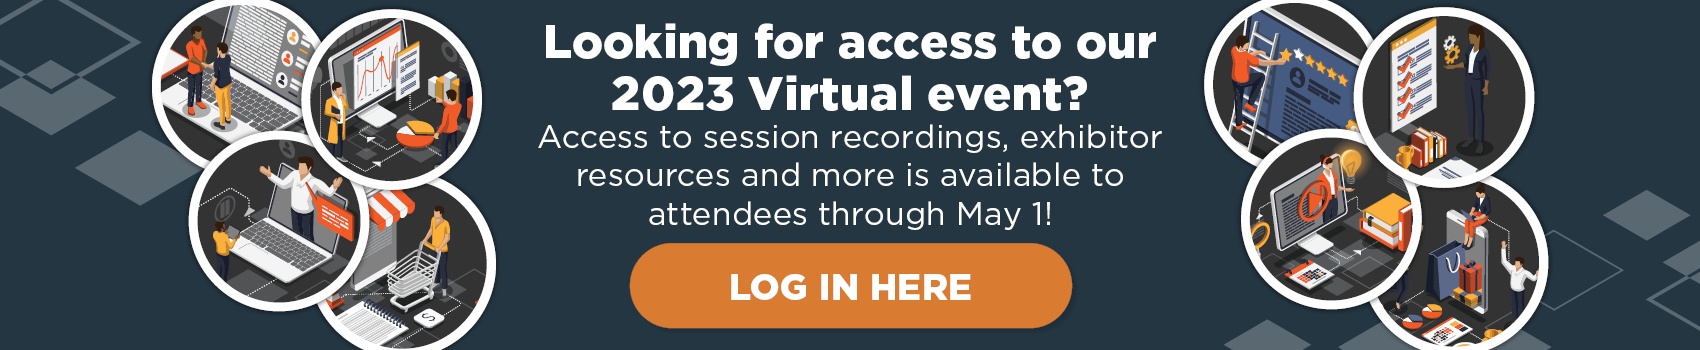 Looking for access to our 2023 Virtual event?
Access to session recordings, exhibitor resources and more is available to attendees through May 1!